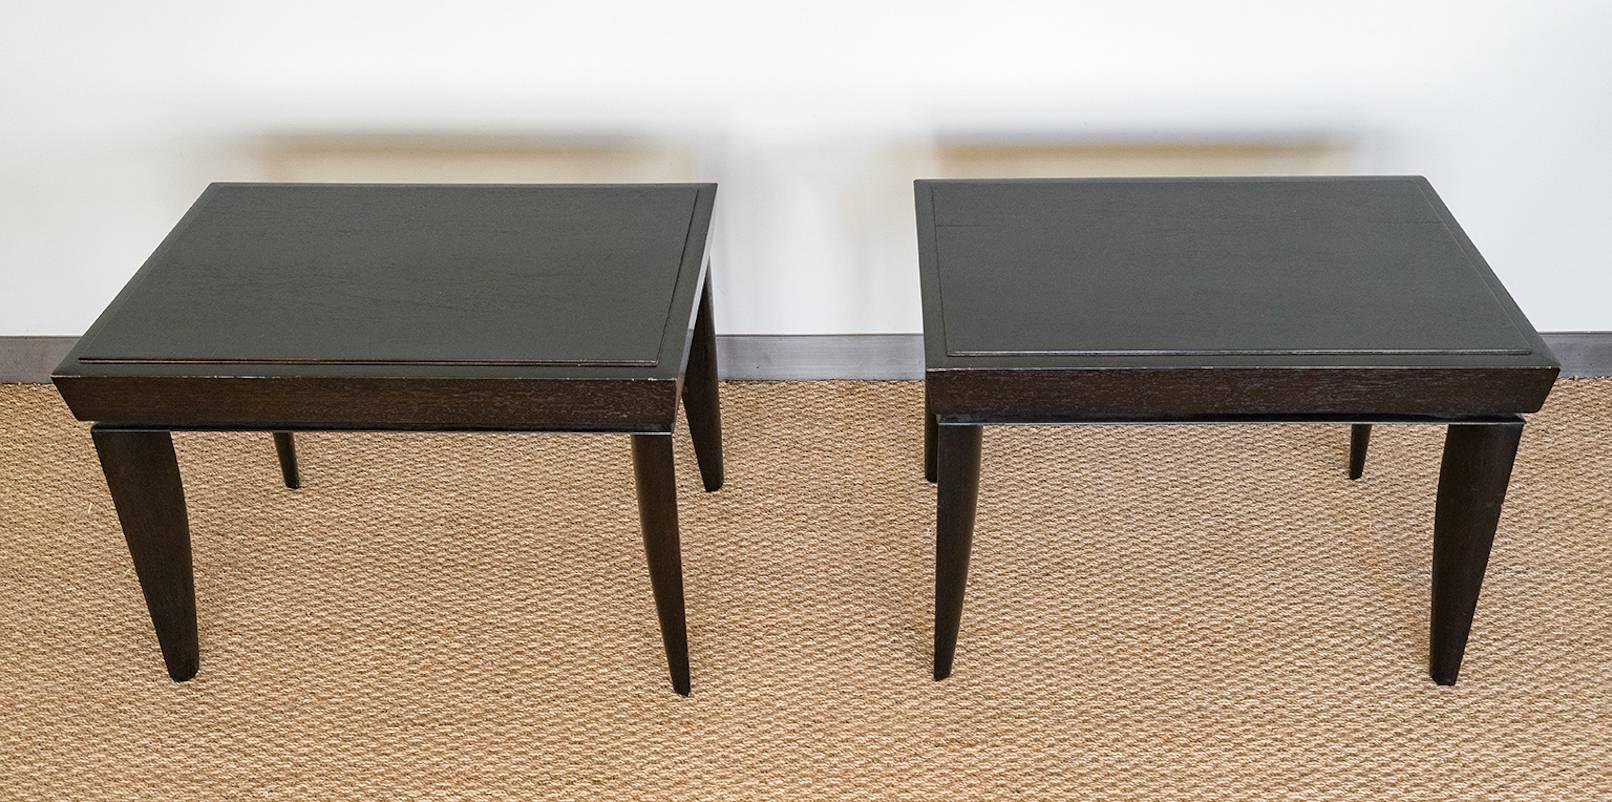 Oak, satin black elegant, masculine side tables. Can be used for bedside tables as well.